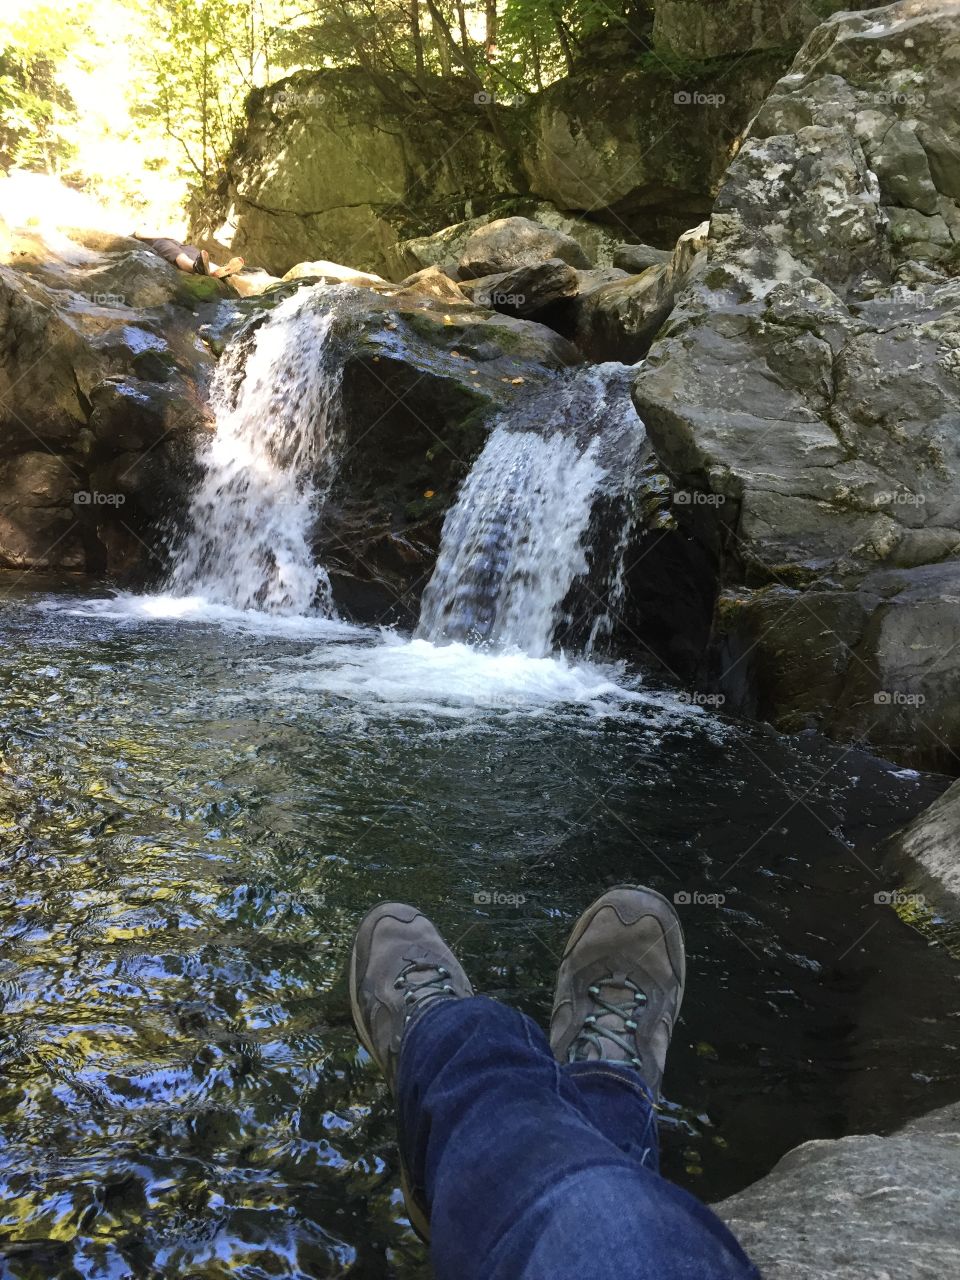 Waterfall relaxation